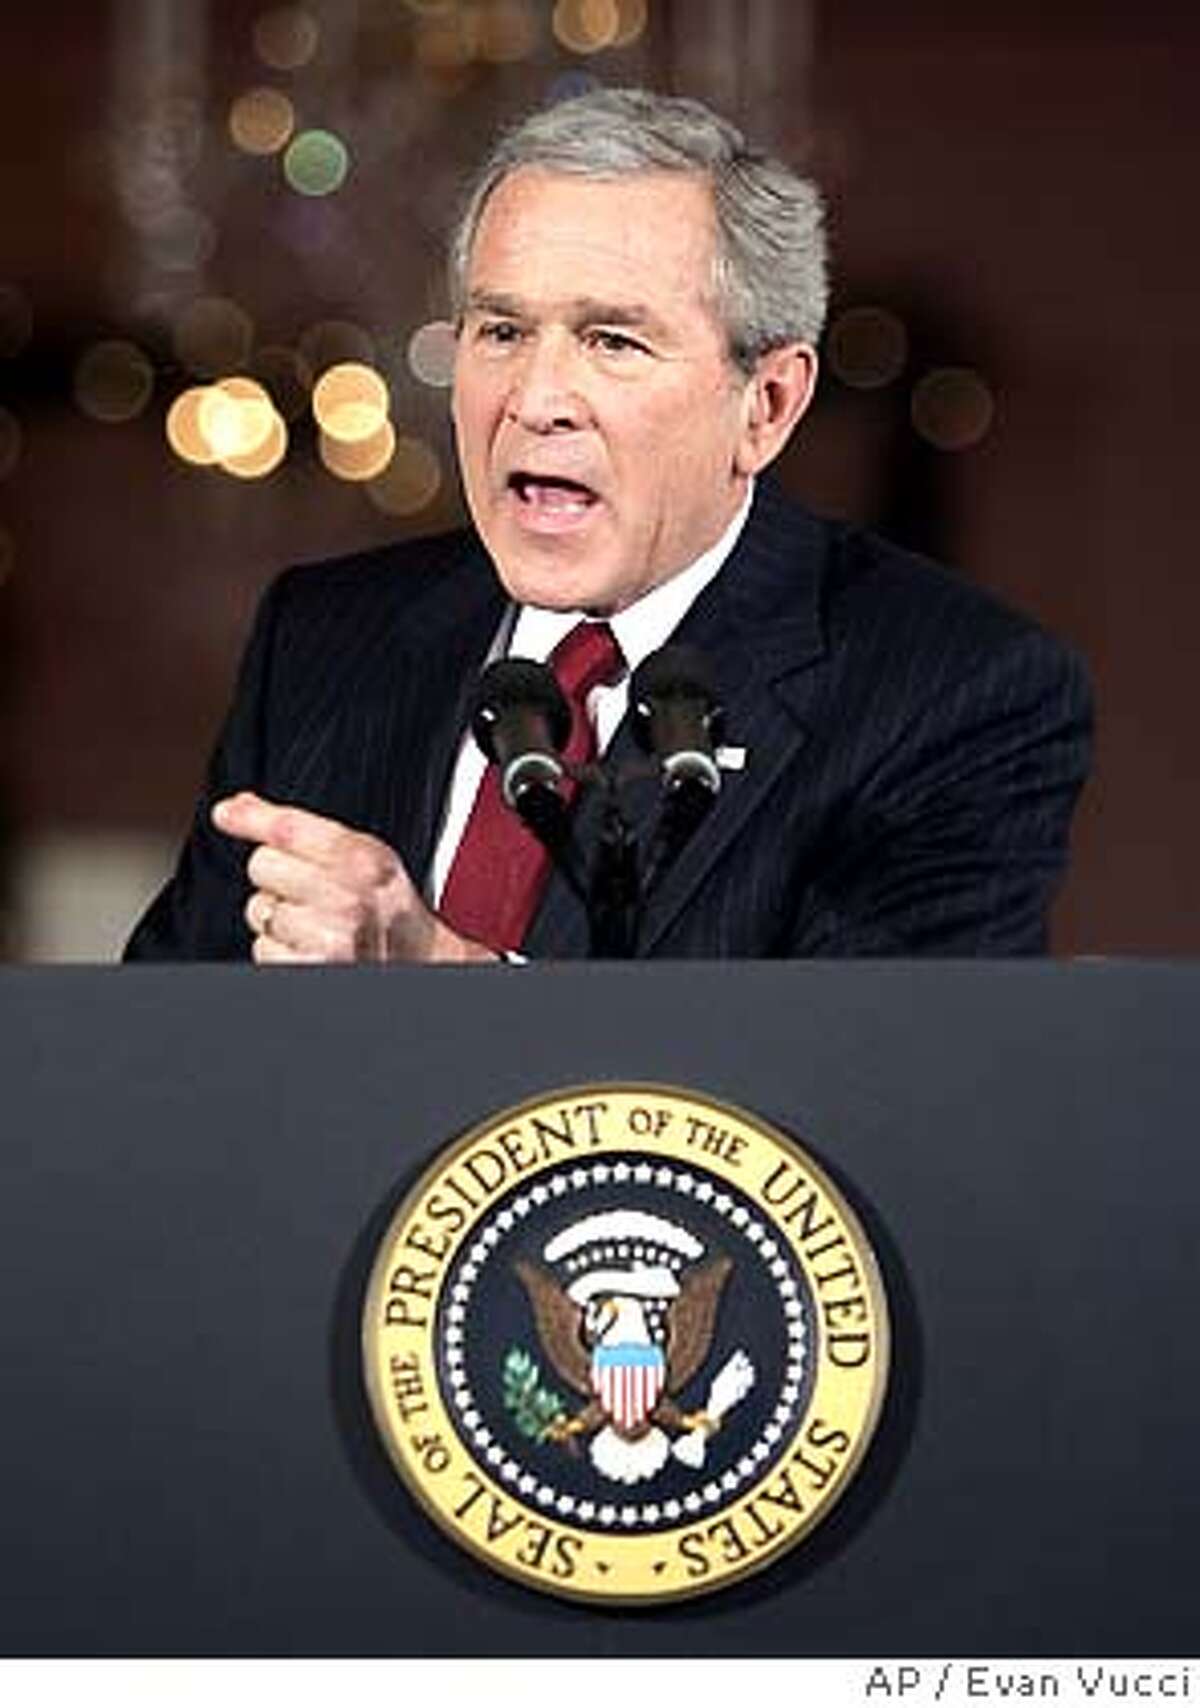 President Bush gestures during a news conference in the East Room of the White House on Monday, Dec. 19, 2005 in Washington. Bush, brushing aside bipartisan criticism in Congress, said Monday he approved spying on suspected terrorists without court orders because it was "a necessary part of my job to protect" Americans from attack. (AP Photo/Evan Vucci)